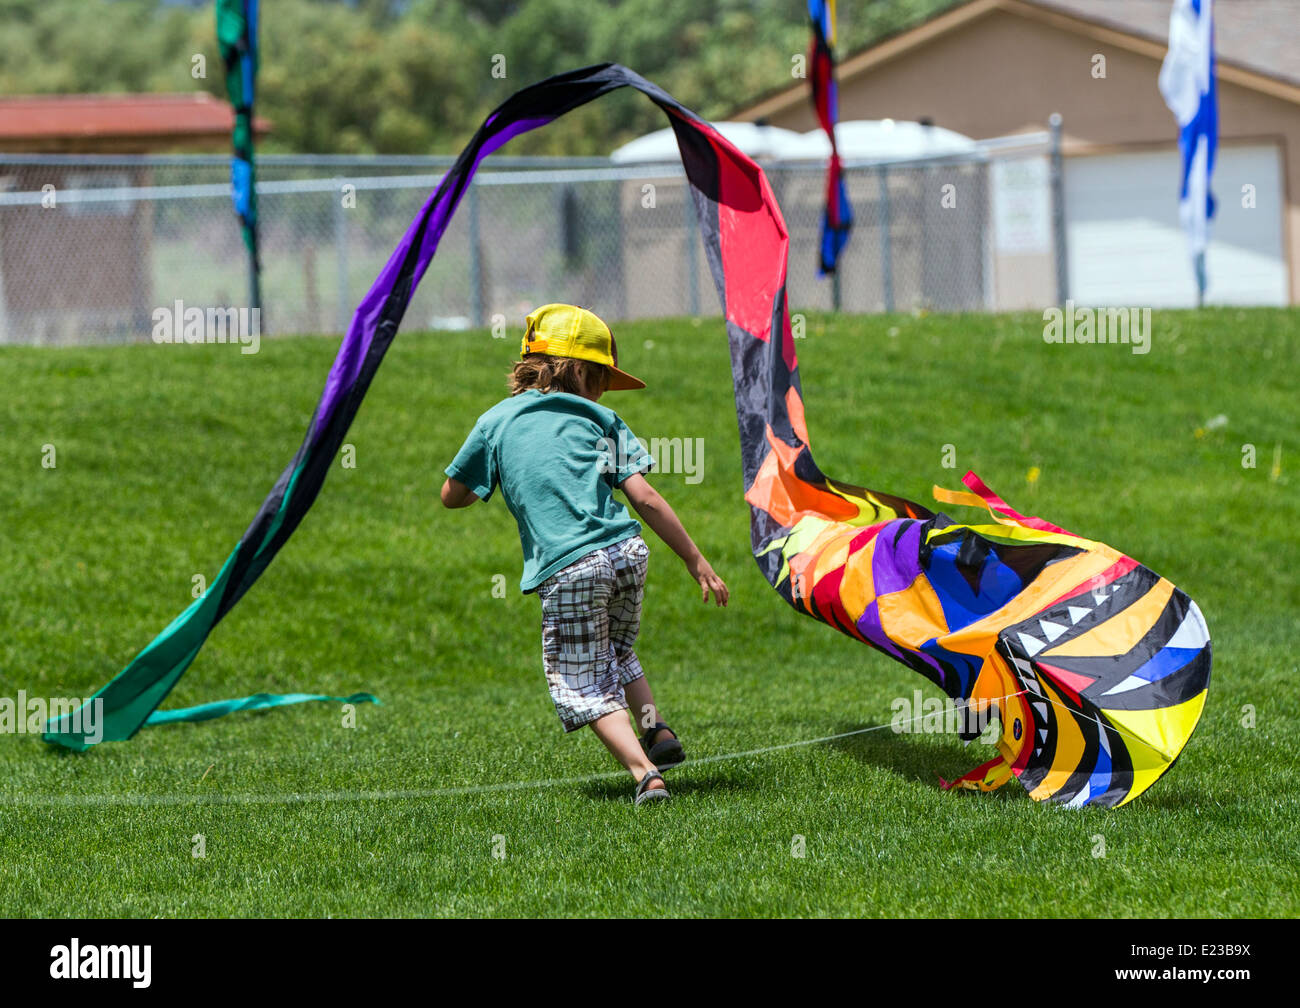 Young boy launching a kite on a grassy field Stock Photo